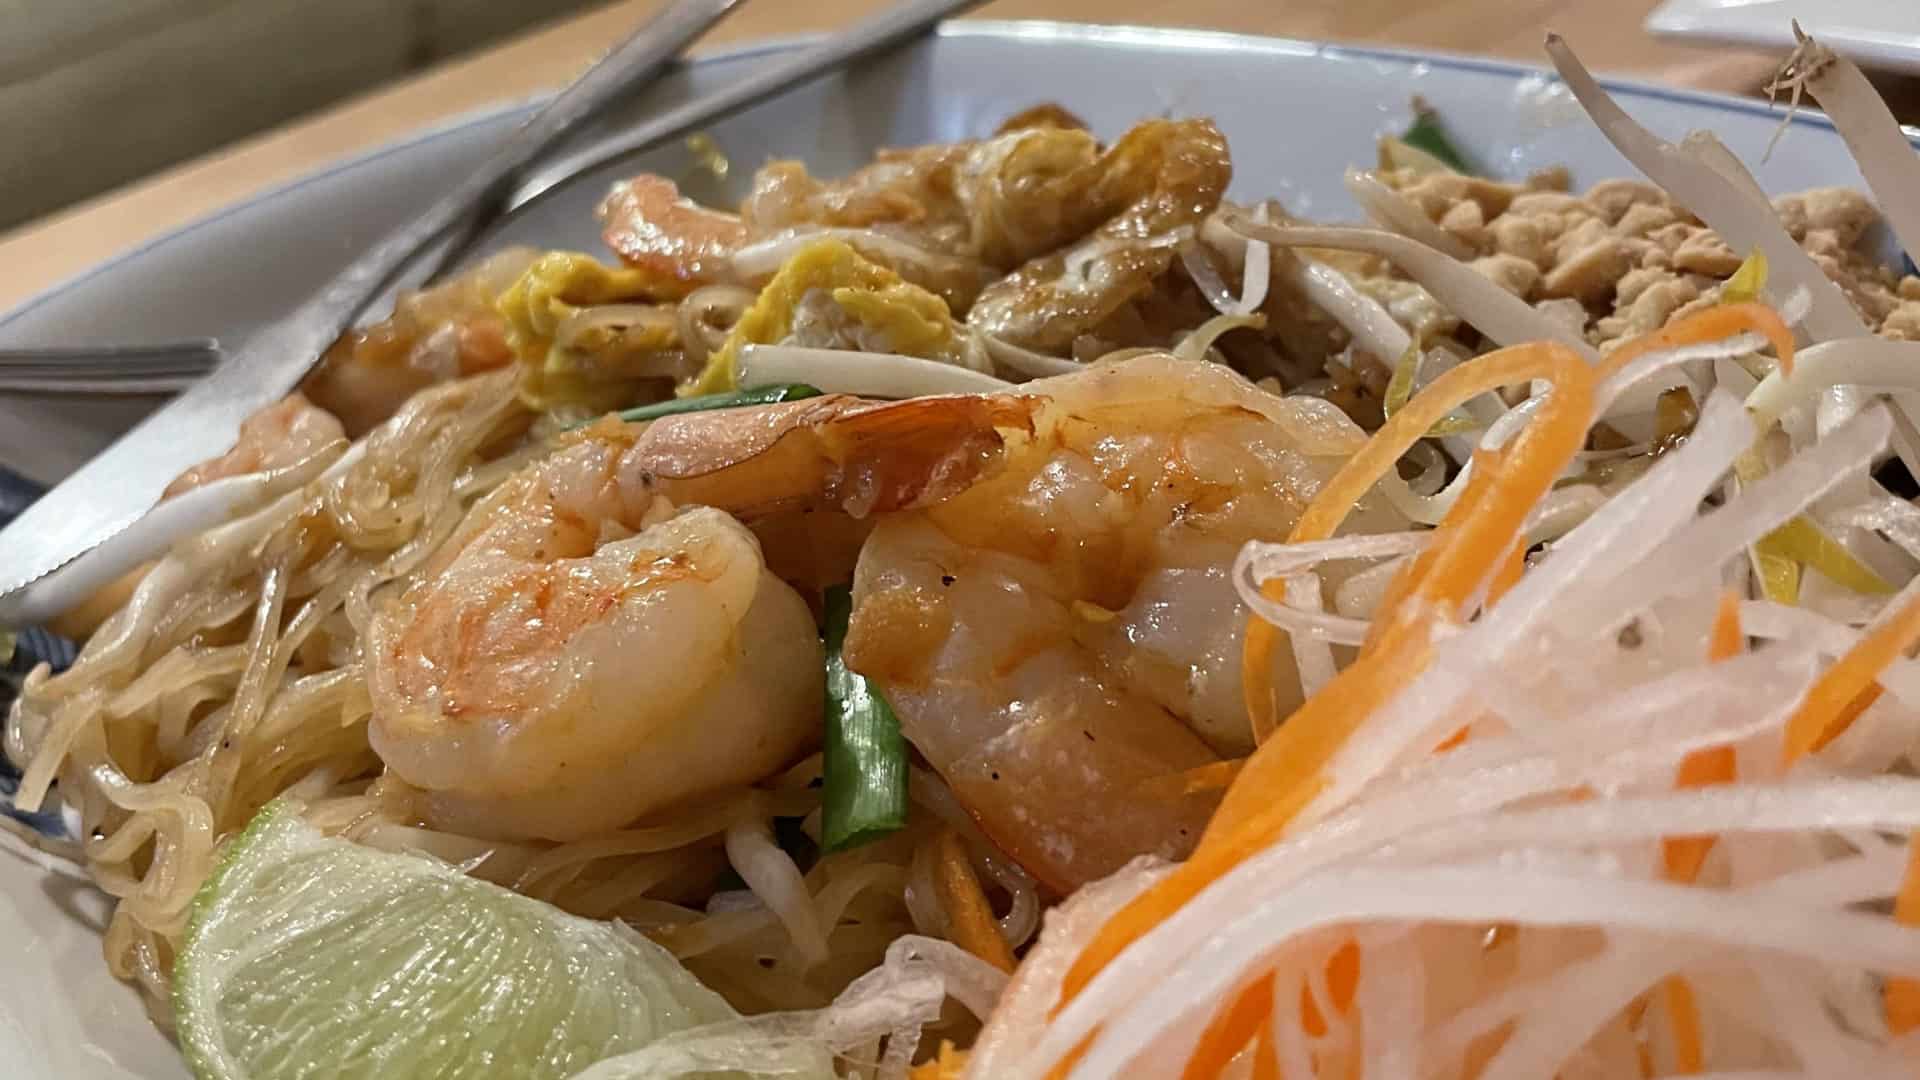 Shrimp sit temptingly on pad thai at Steam noodle cafe in Great Barrington.